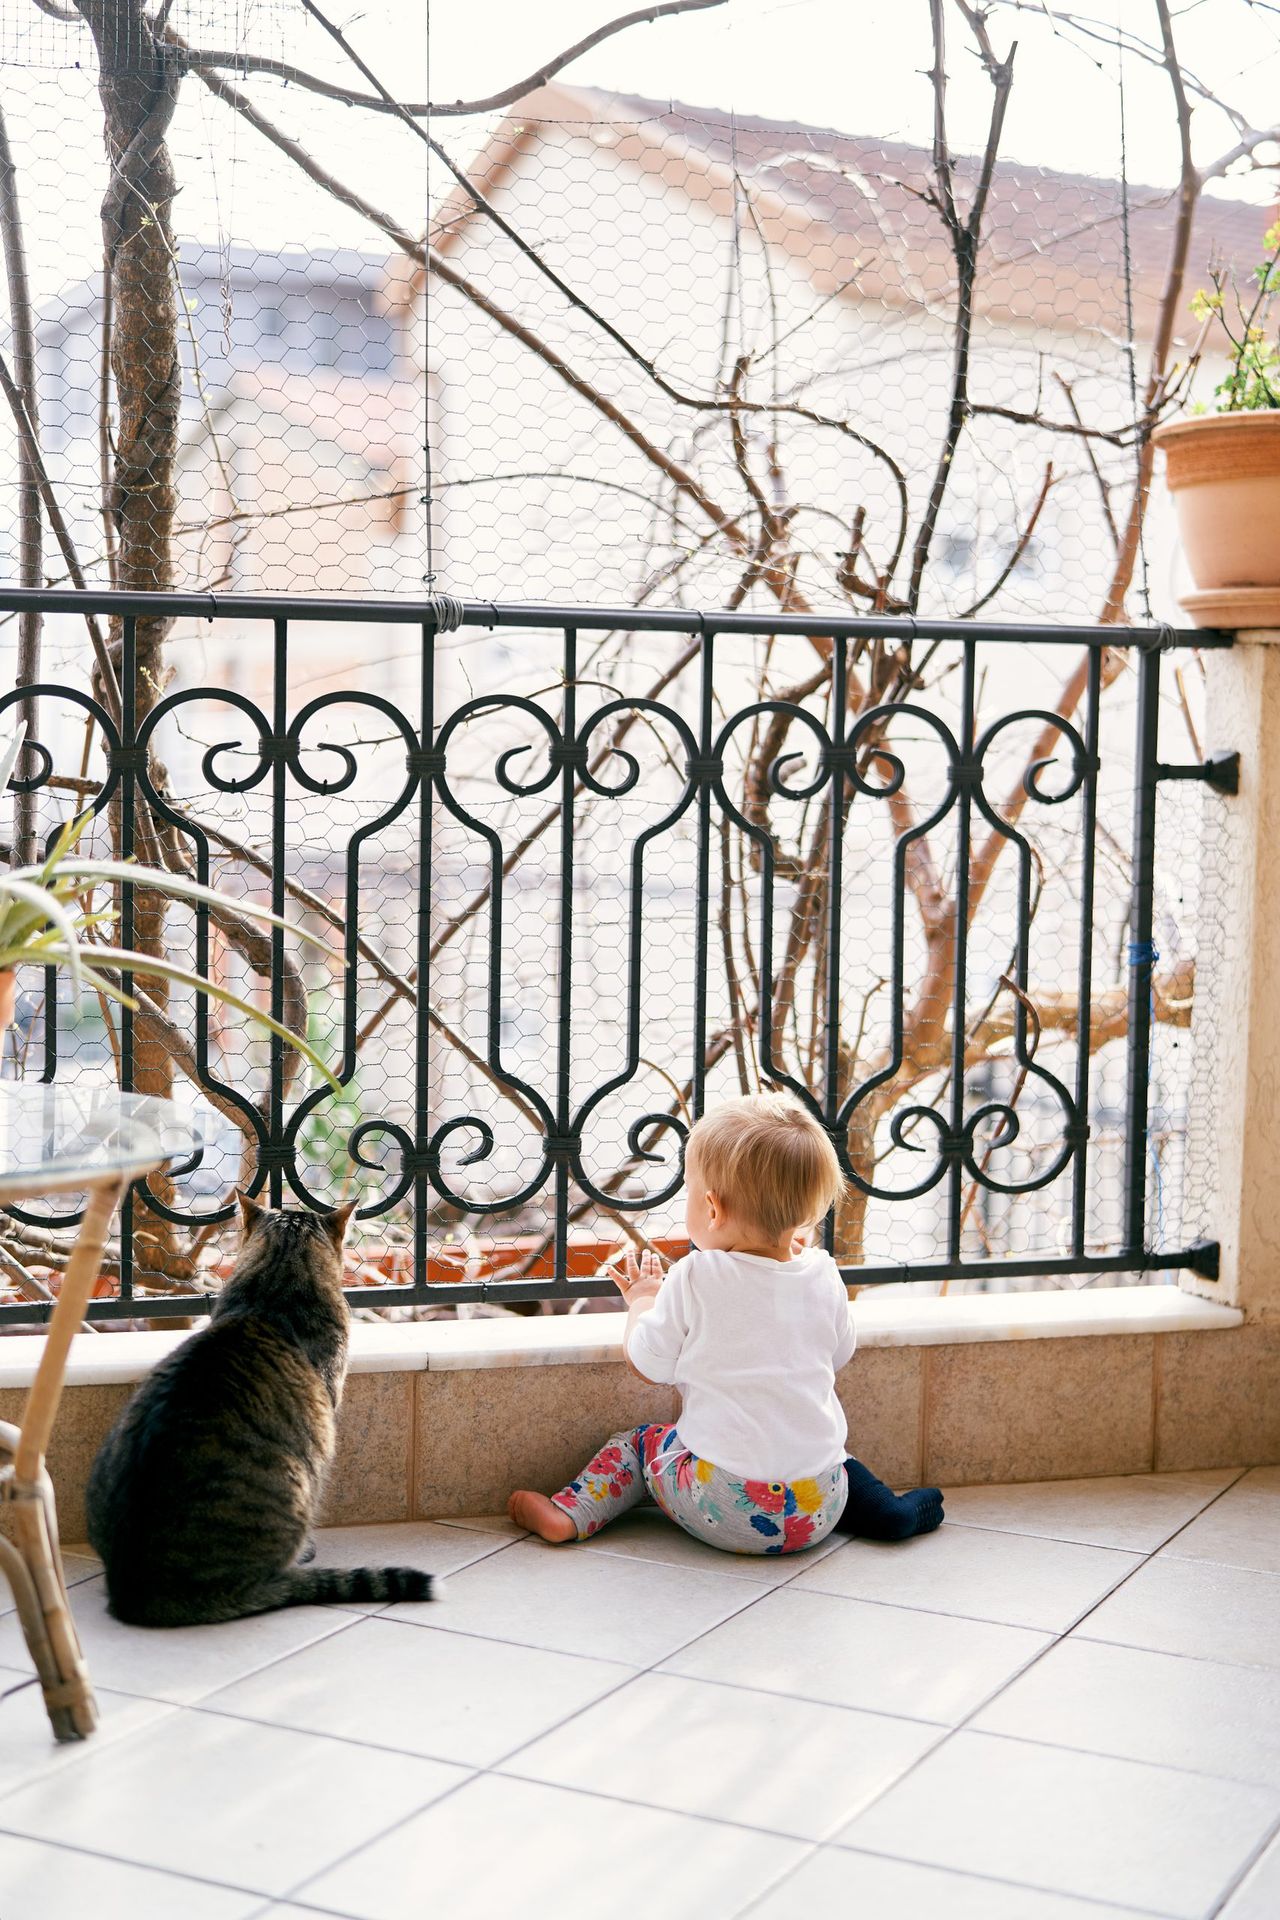 Small child sits on the balcony near the forged lattice and a table with flowerpots. A tabby cat sits next to him. High quality photo